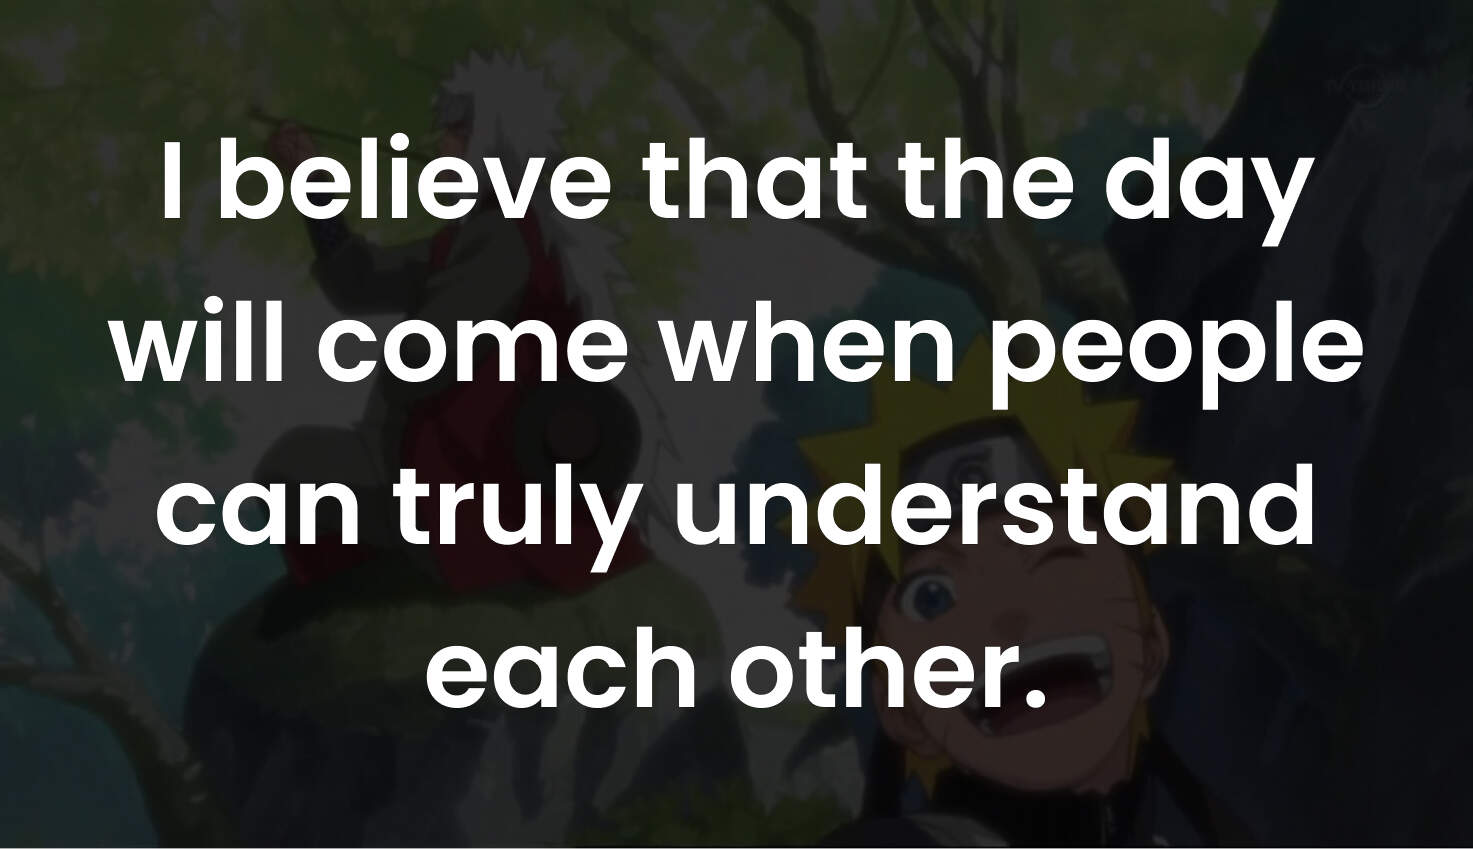 I believe that the day will come when people can truly understand each other.